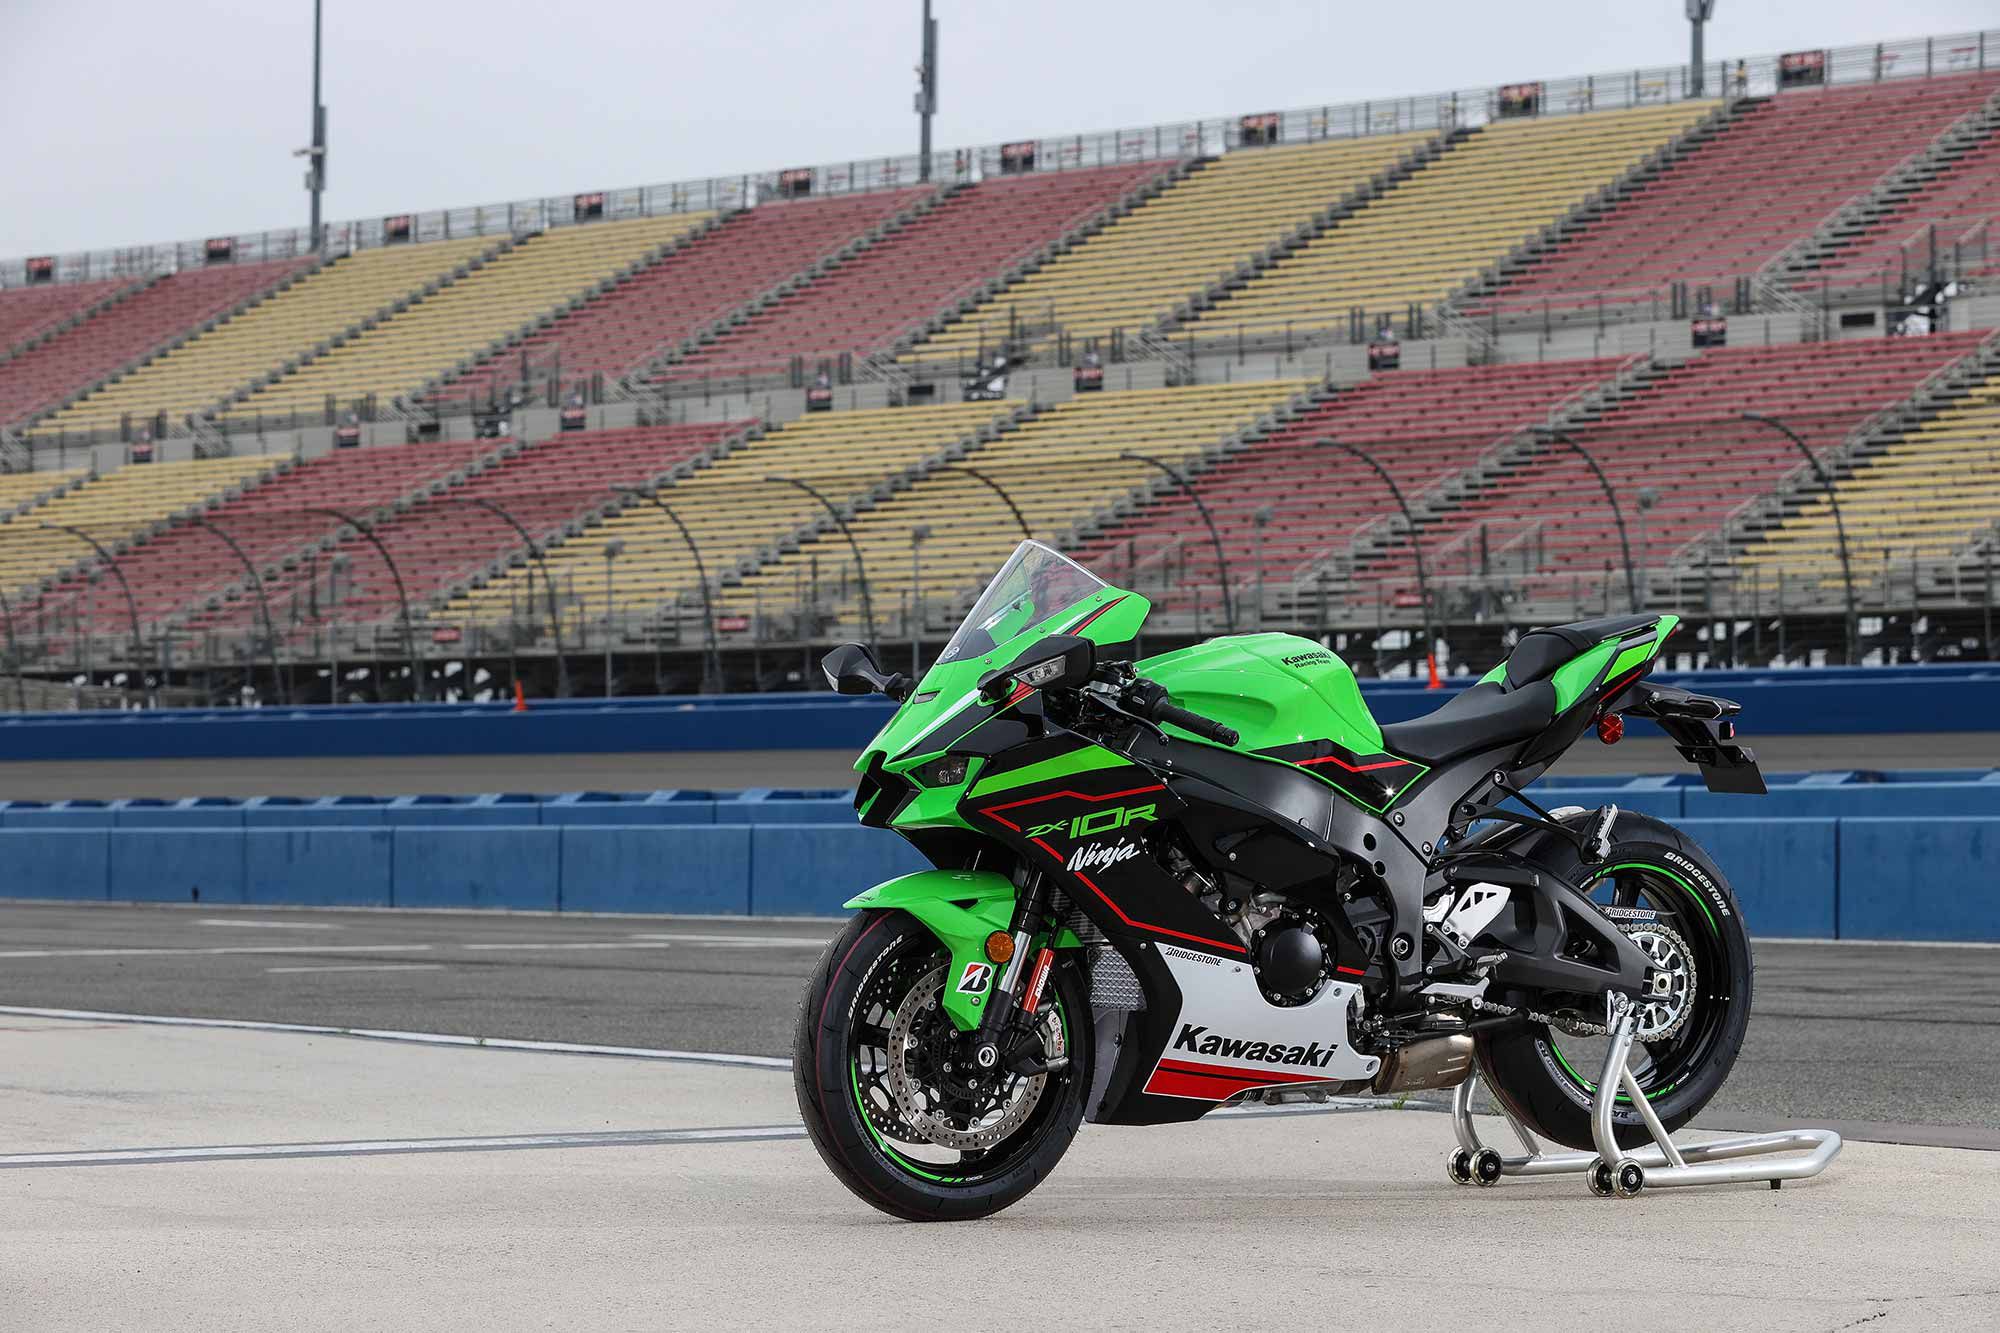 We swing a leg over the 2021 Kawasaki Ninja ZX-10R in this review. At the track, no less.